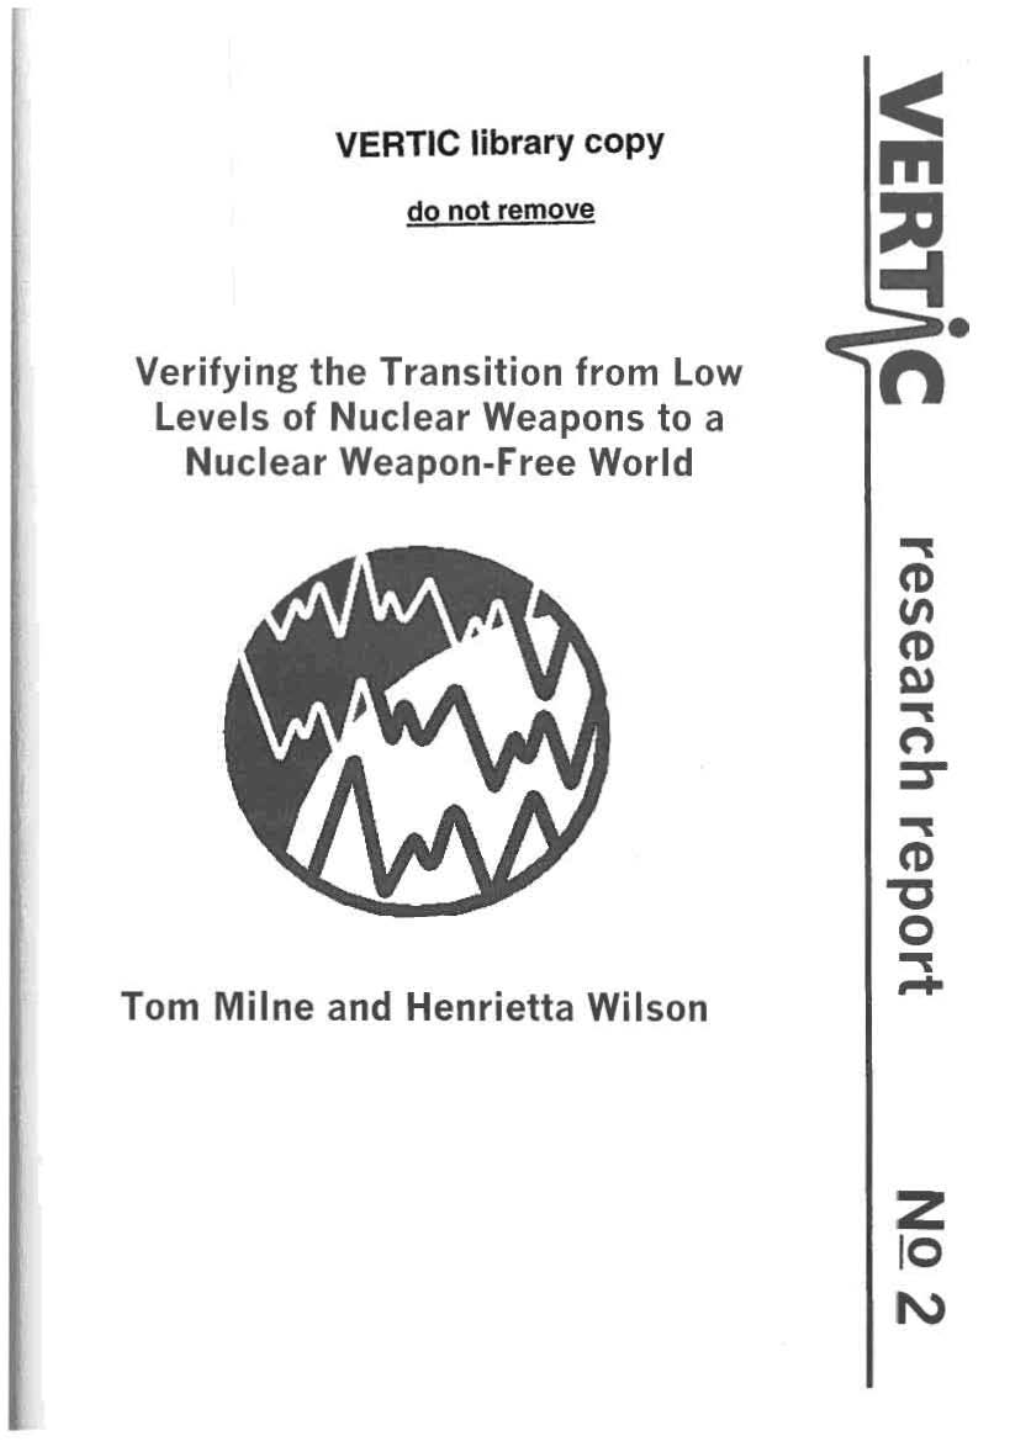 Verifying the Transition from Low Levels of Nuclear Weapons to a Nuclear Weapon-Free World Tom Milne and Henrietta Wilson